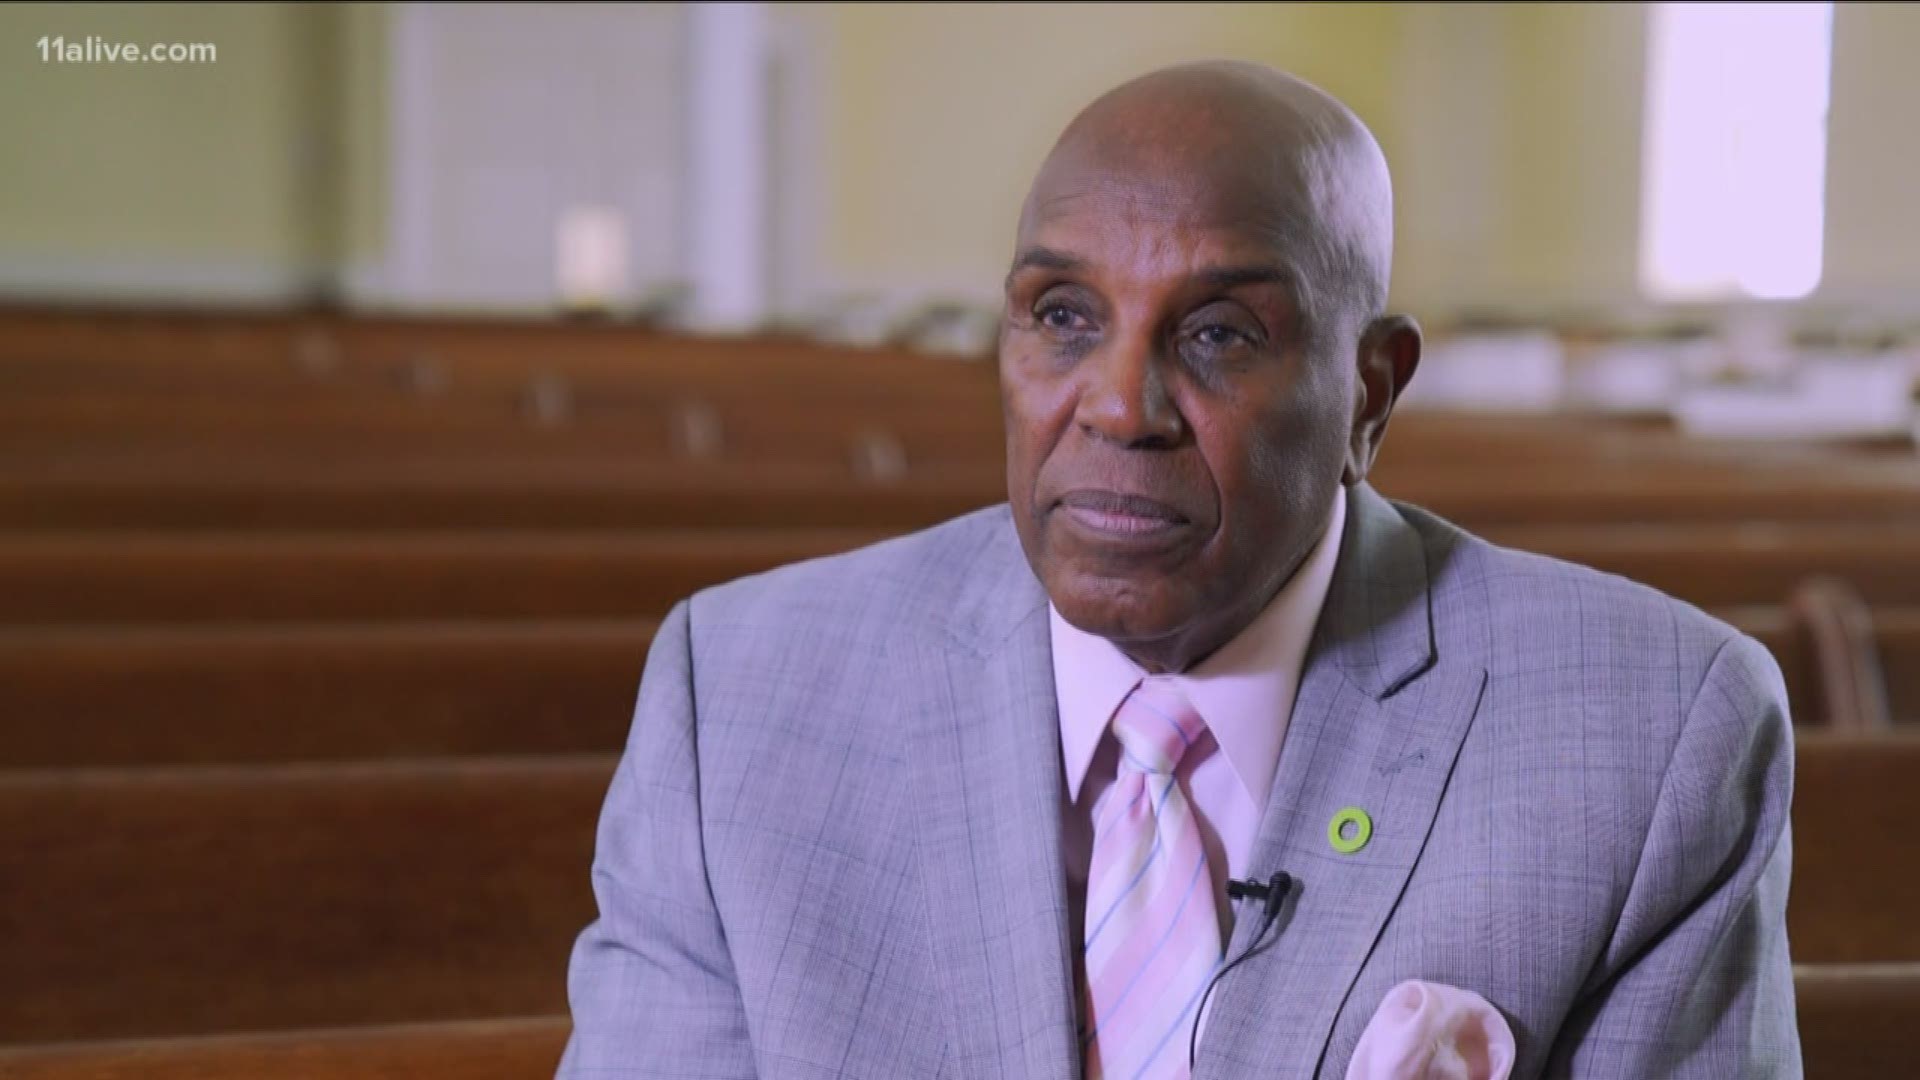 Rev. Dr. Gerald Durley inspires his community and beyond by bringing climate change discussions into minority communities through the church.